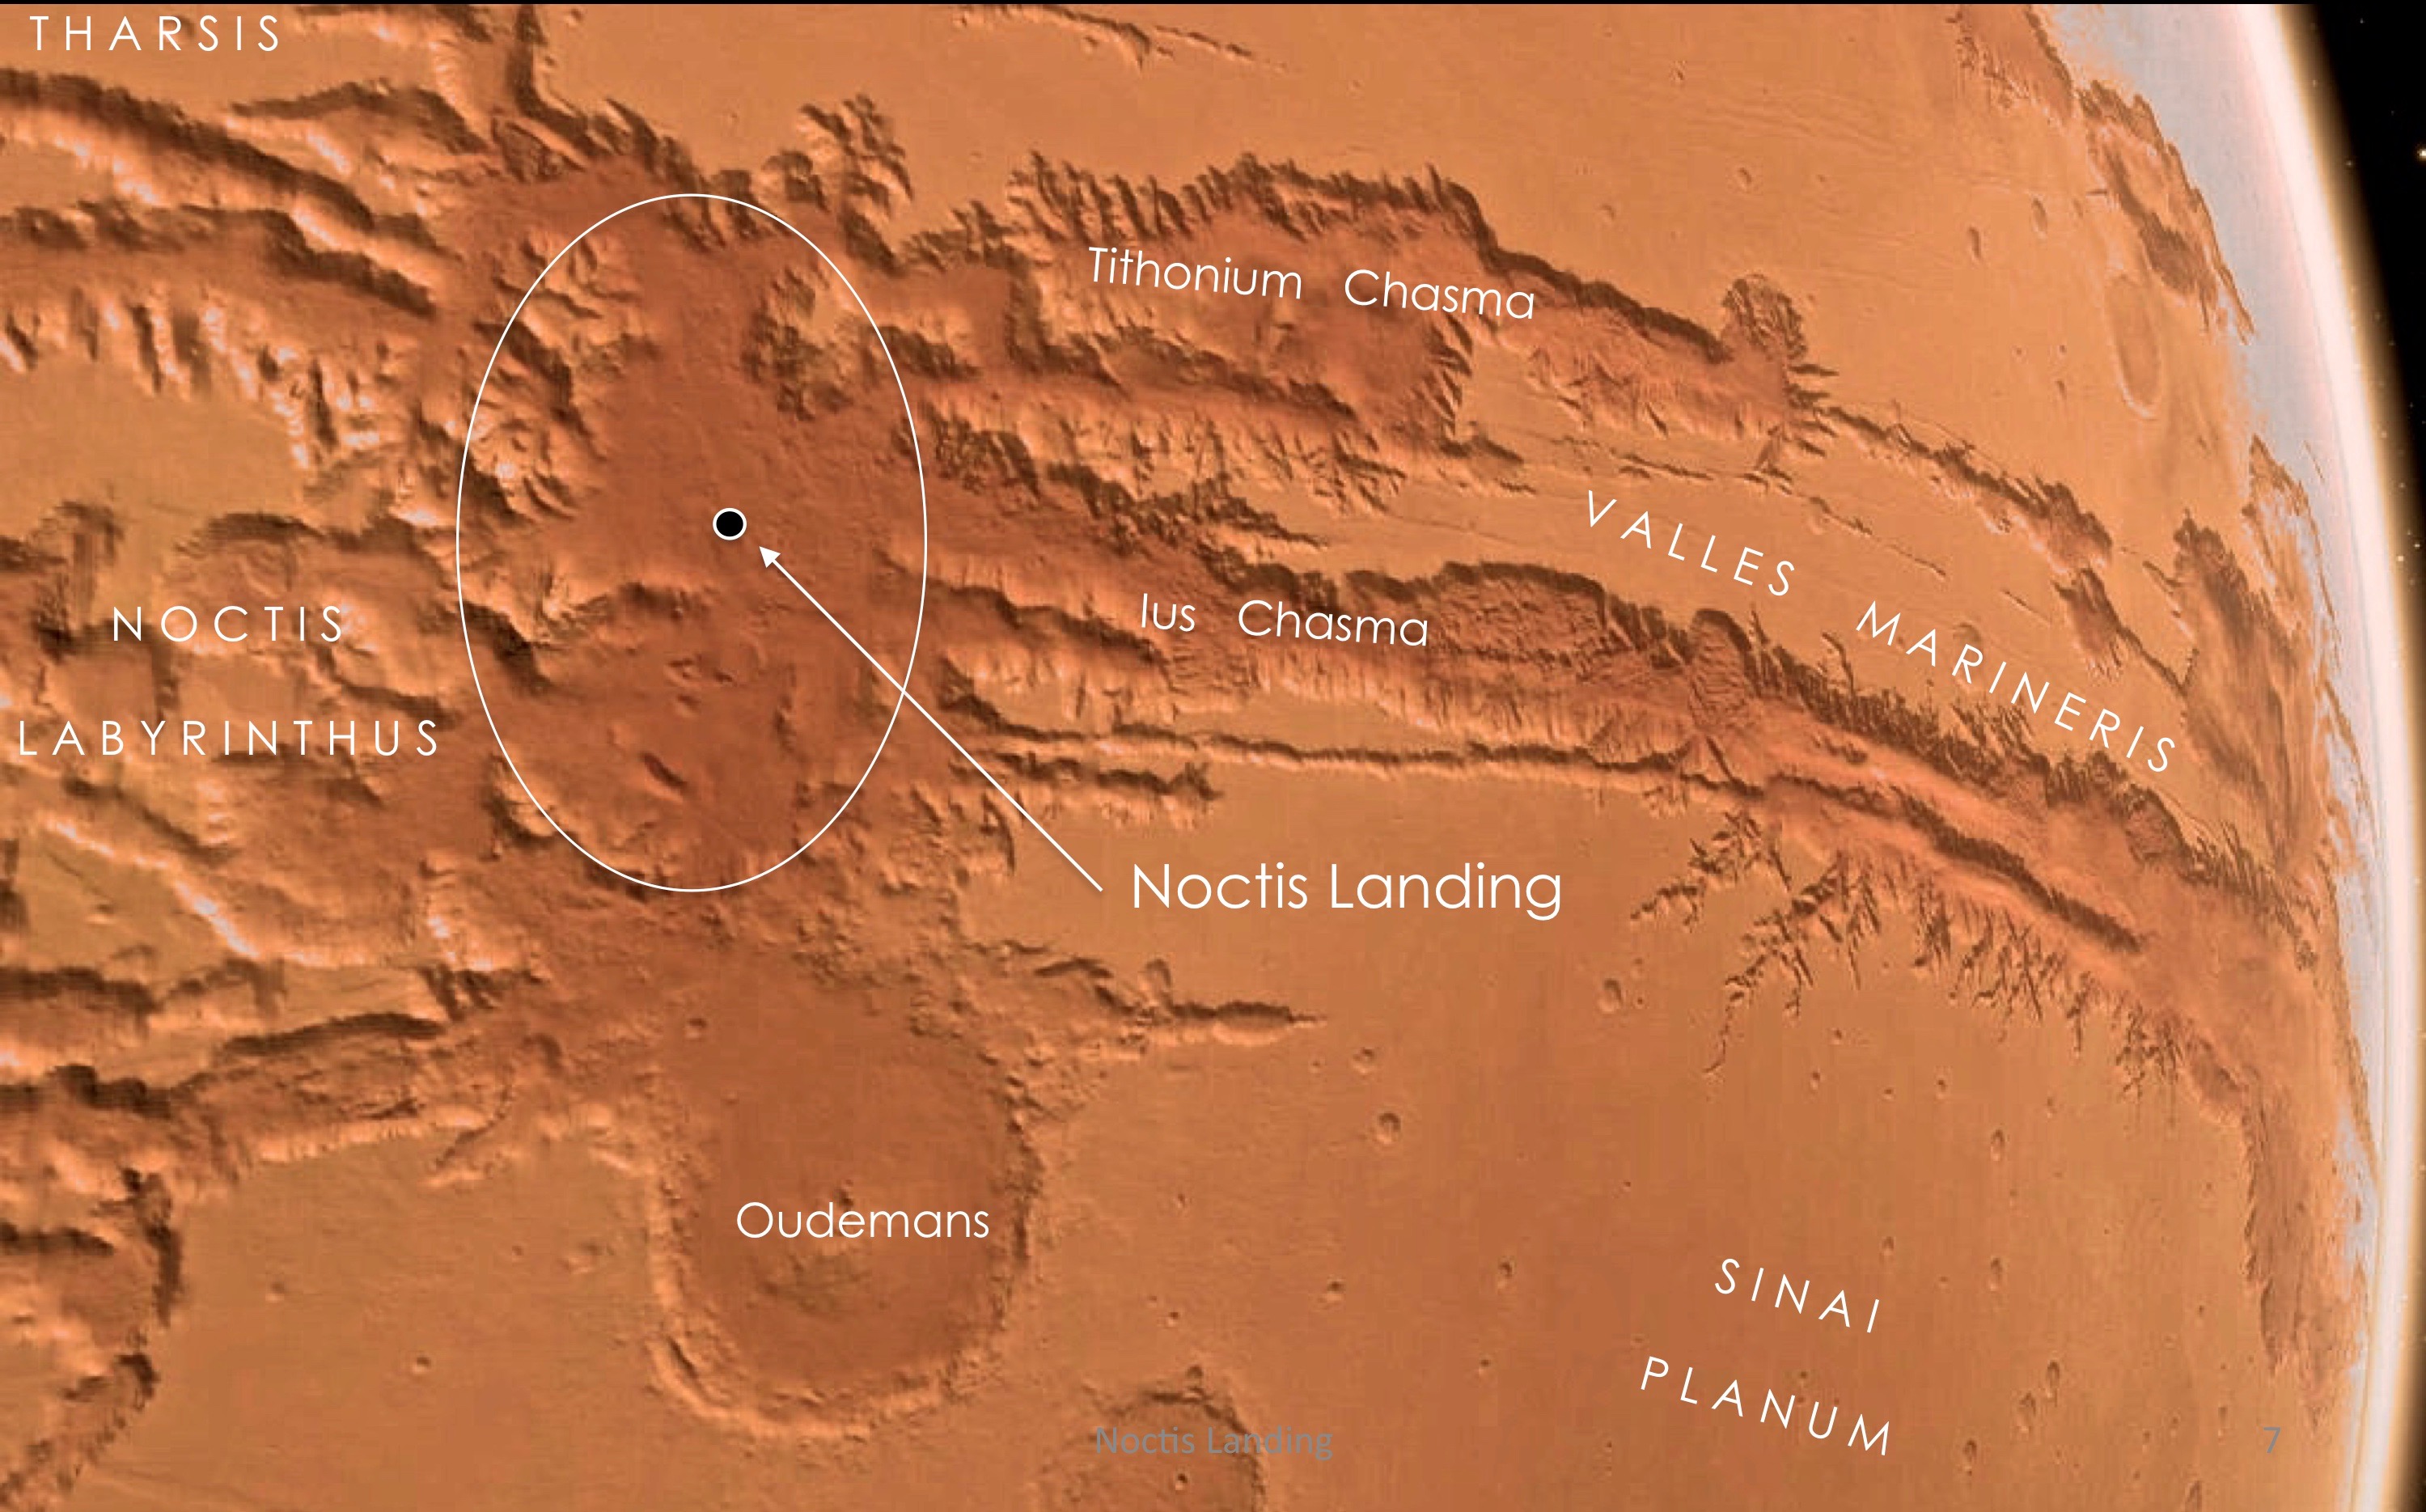 Noctis Landing on Mars is a seemingly flat transition area between Noctis Labyrinthus and Valles Marineris.